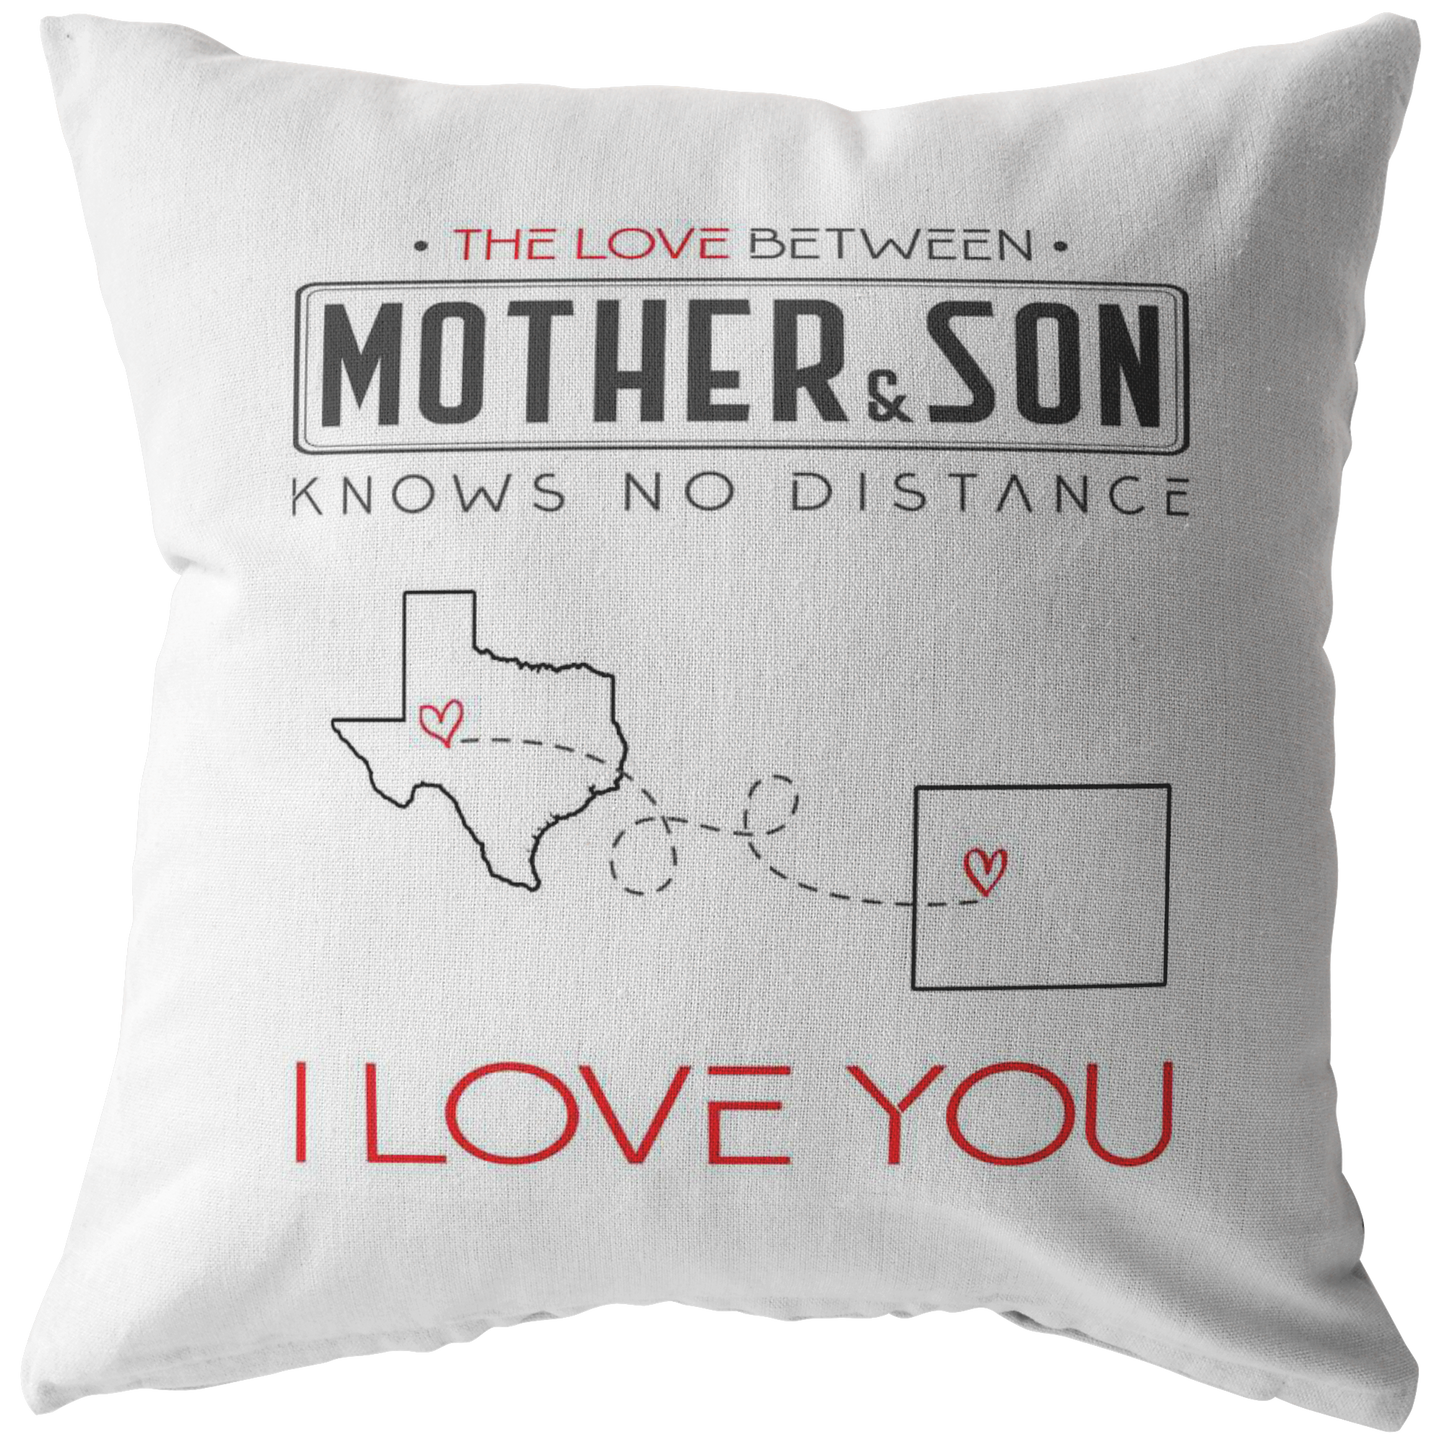 ND-pl20419516-sp-23465 - Long Distance Mom - The Love Between Mother  Son Knows No D